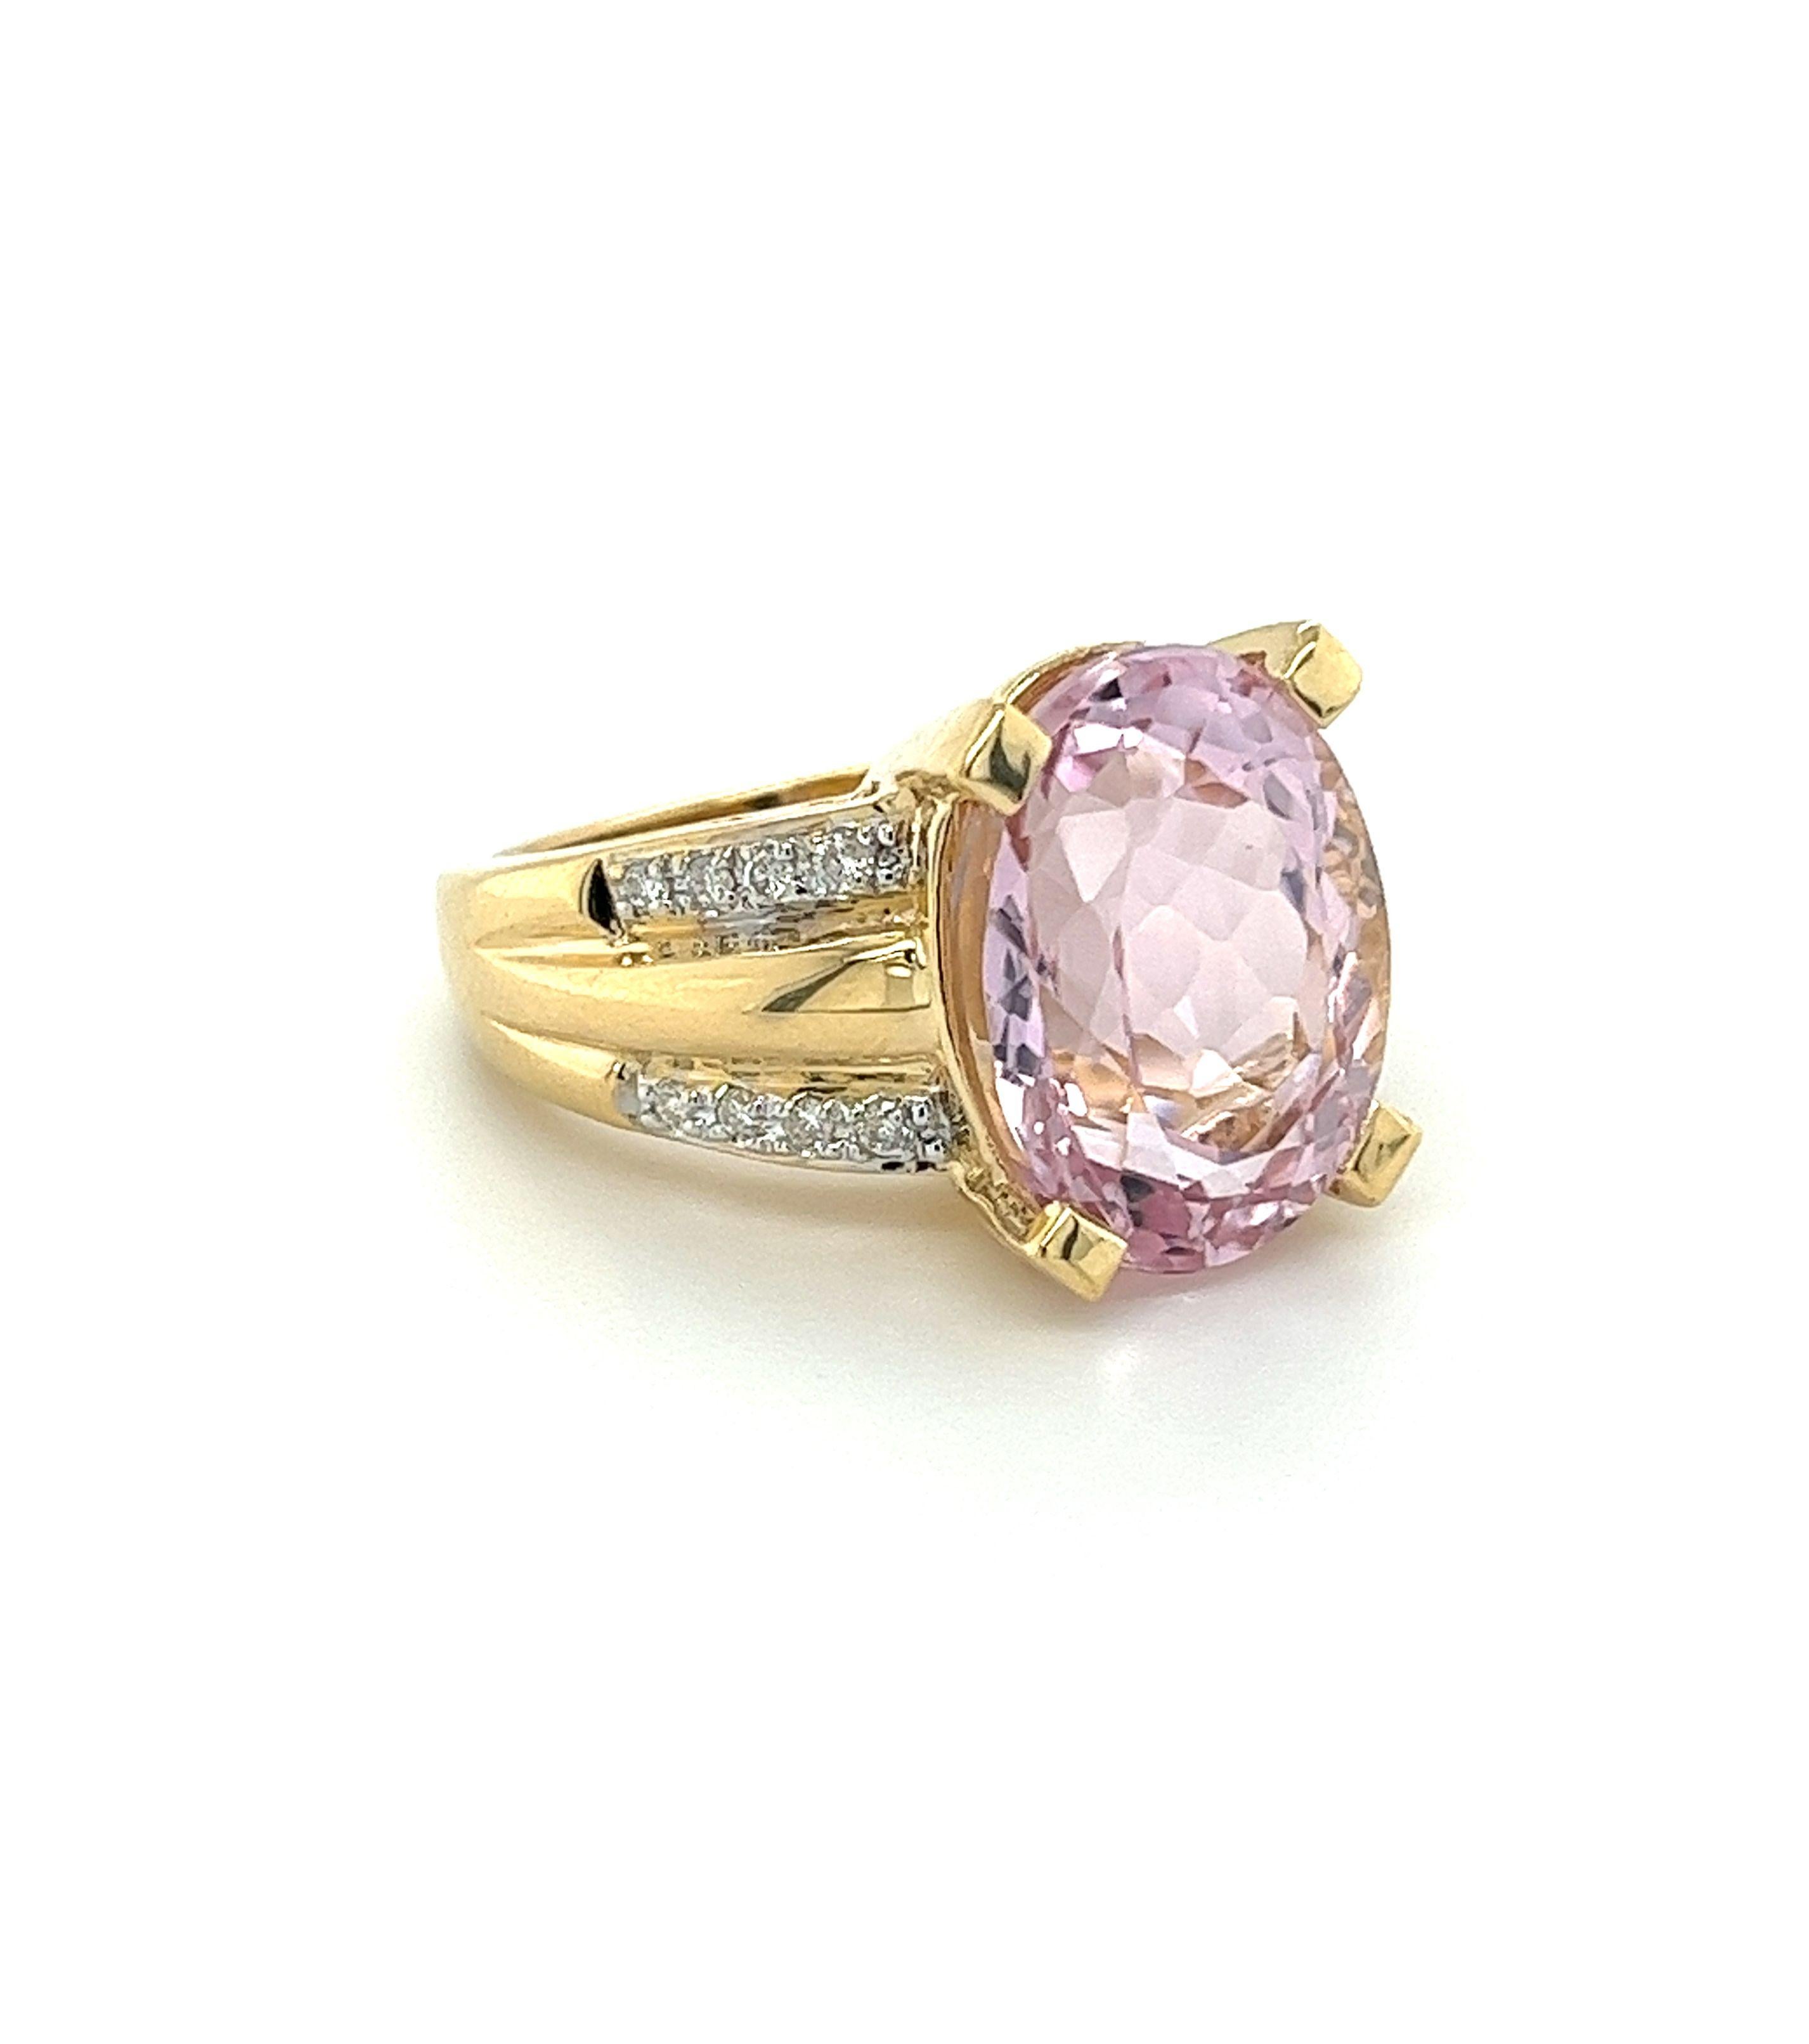 Vintage 9.5 Carat Pink Kunzite & Diamond Cocktail Split Shank Ring in 18k Gold  In Excellent Condition For Sale In Miami, FL